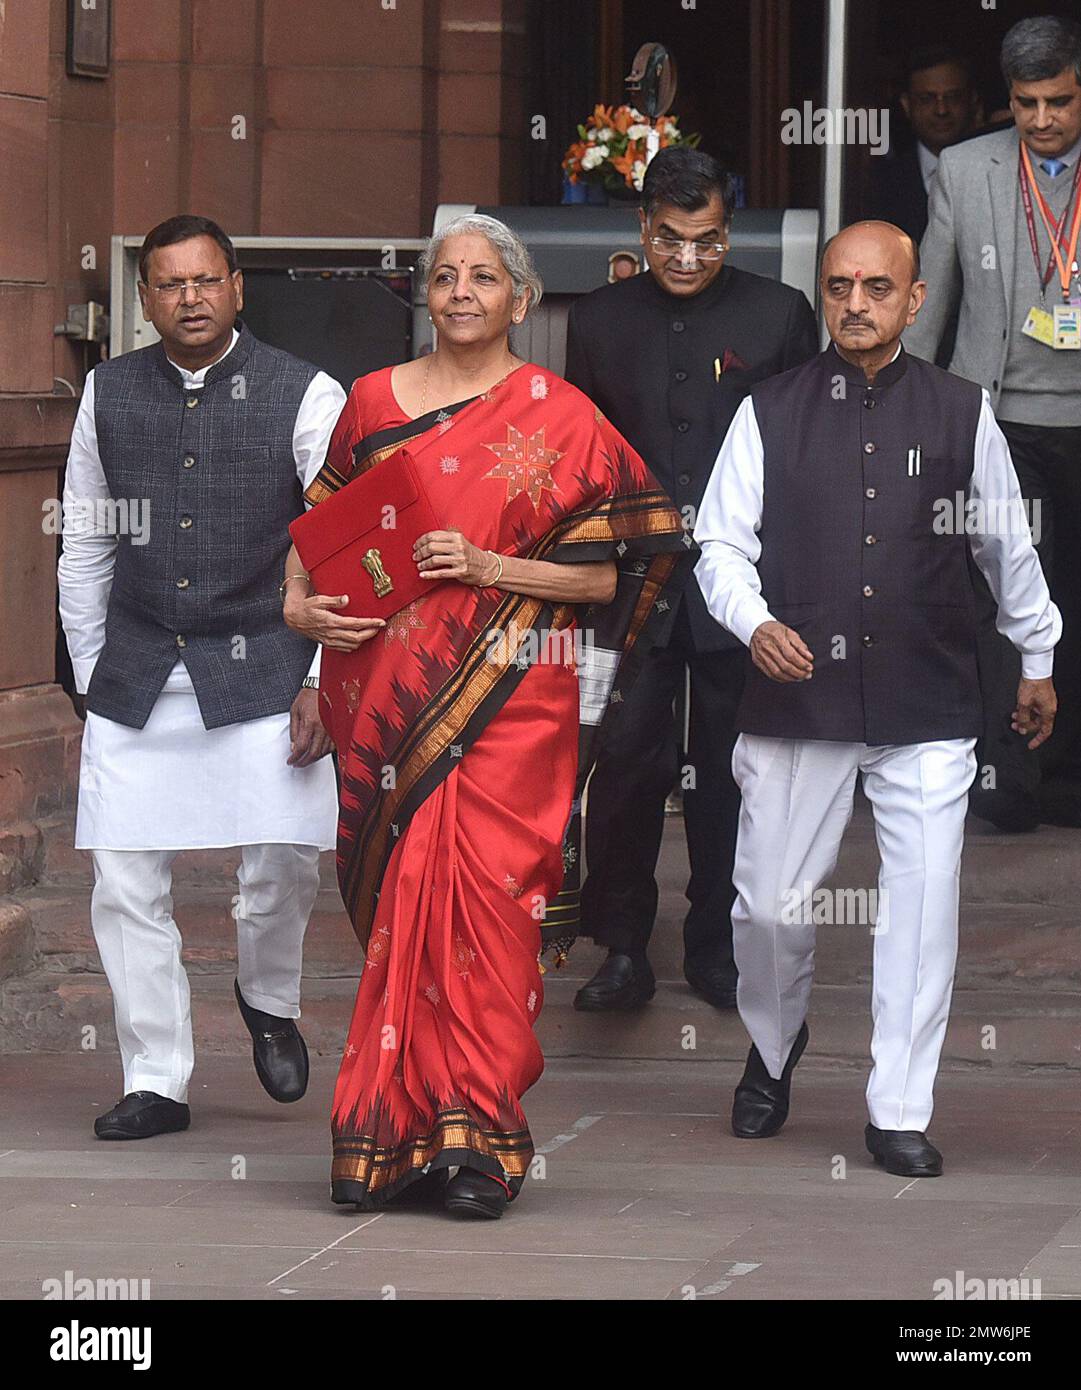 NEW DELHI, INDIA - FEBRUARY 1: Union Finance Minister Nirmala Sitharaman with Ministers of State Bhagwat Kishanrao Karad and Pankaj Chaudhary and officials poses for photographs outside the Finance Ministry ahead of the presentation of the Union Budget 2023-24 at North Block, on February 1, 2023 in New Delhi, India. Nirmala Sitharaman presented the last full-fledged Union Budget of the Modi government before the 2024 Lok Sabha elections. The government sweetened the new income tax regime by making income of up to ?3 lakh exempt from income tax. With a rebate, now people earning up to ?7 lakh n Stock Photo